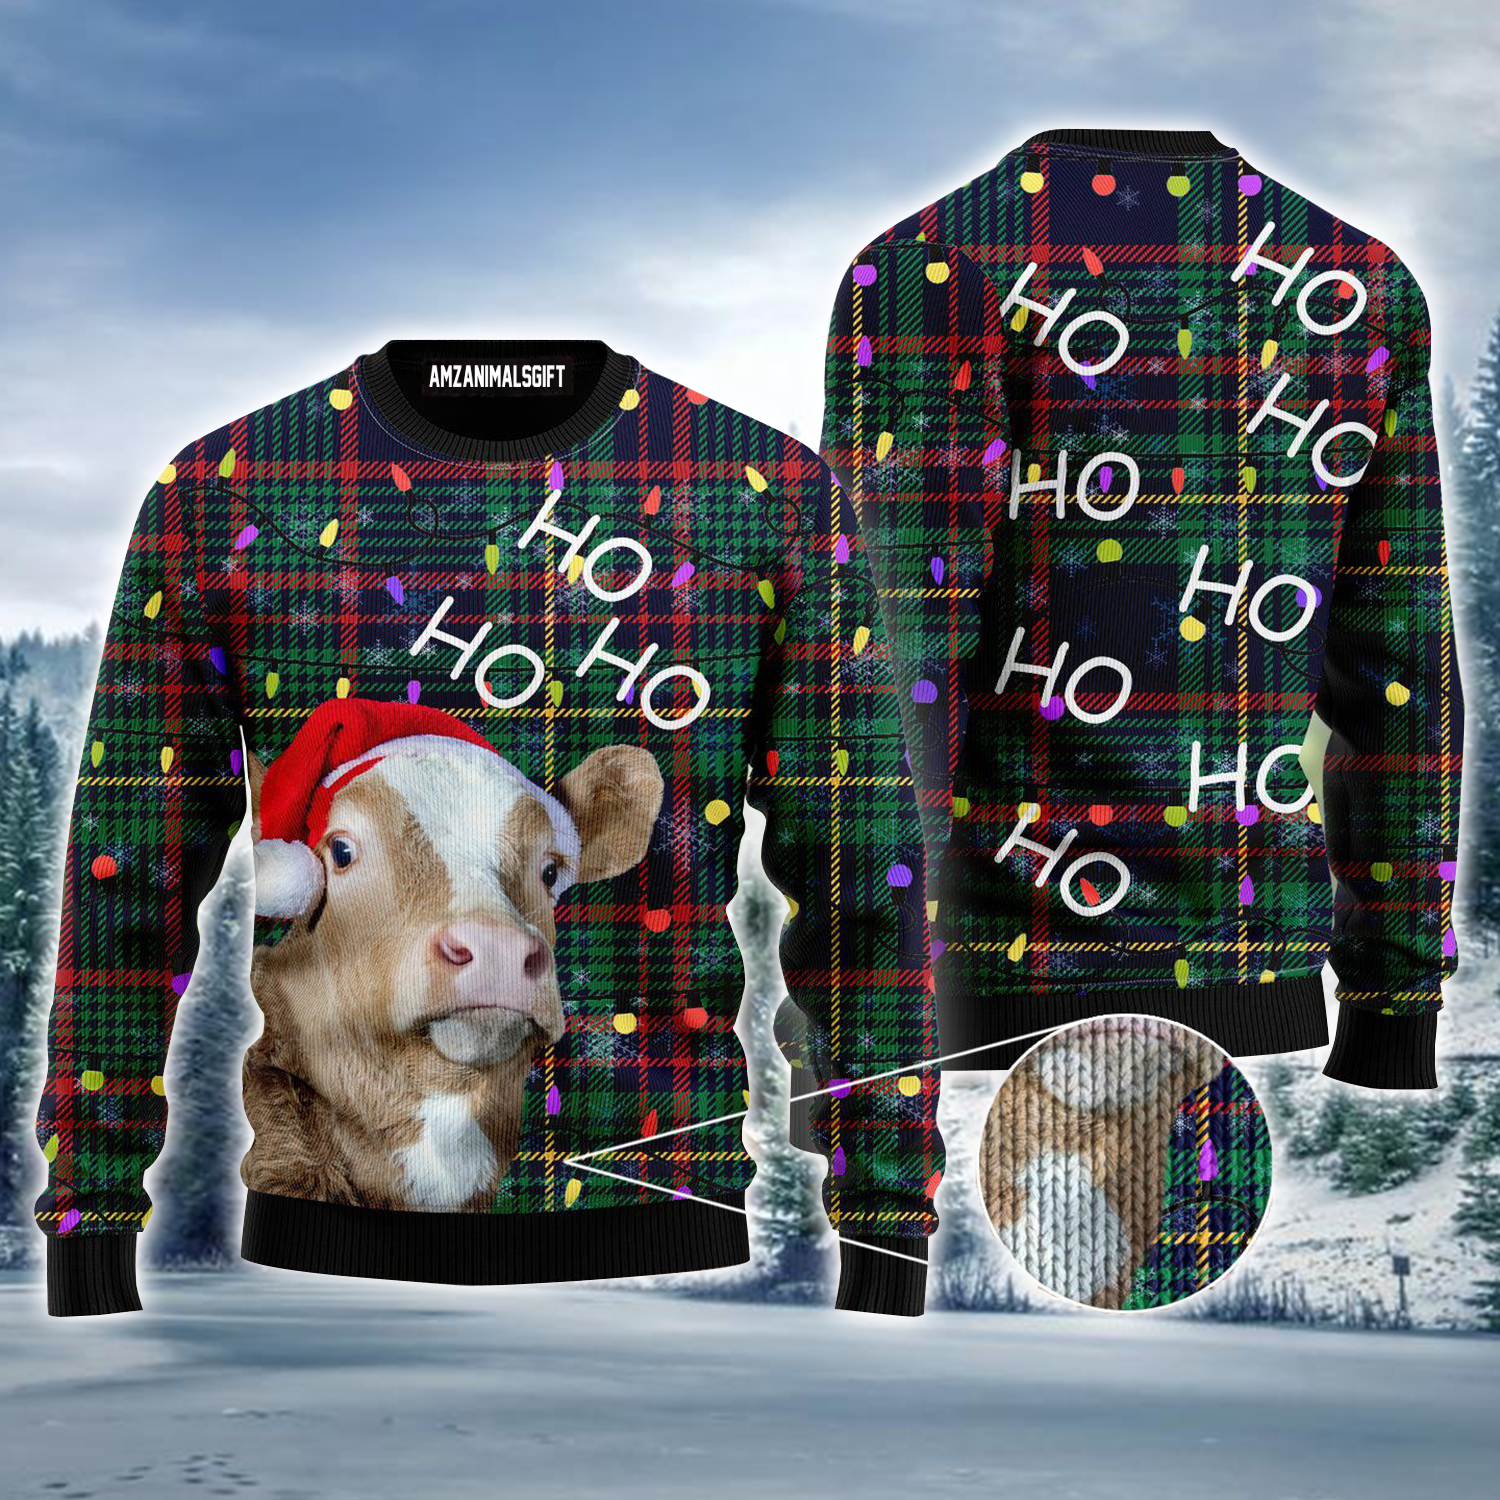 Cow Ugly Sweater, Hohoho Ugly Christmas Sweater, Funny Cow & Christmas Tree Ugly Sweater For Men & Women, Perfect Gift For Friends, Family